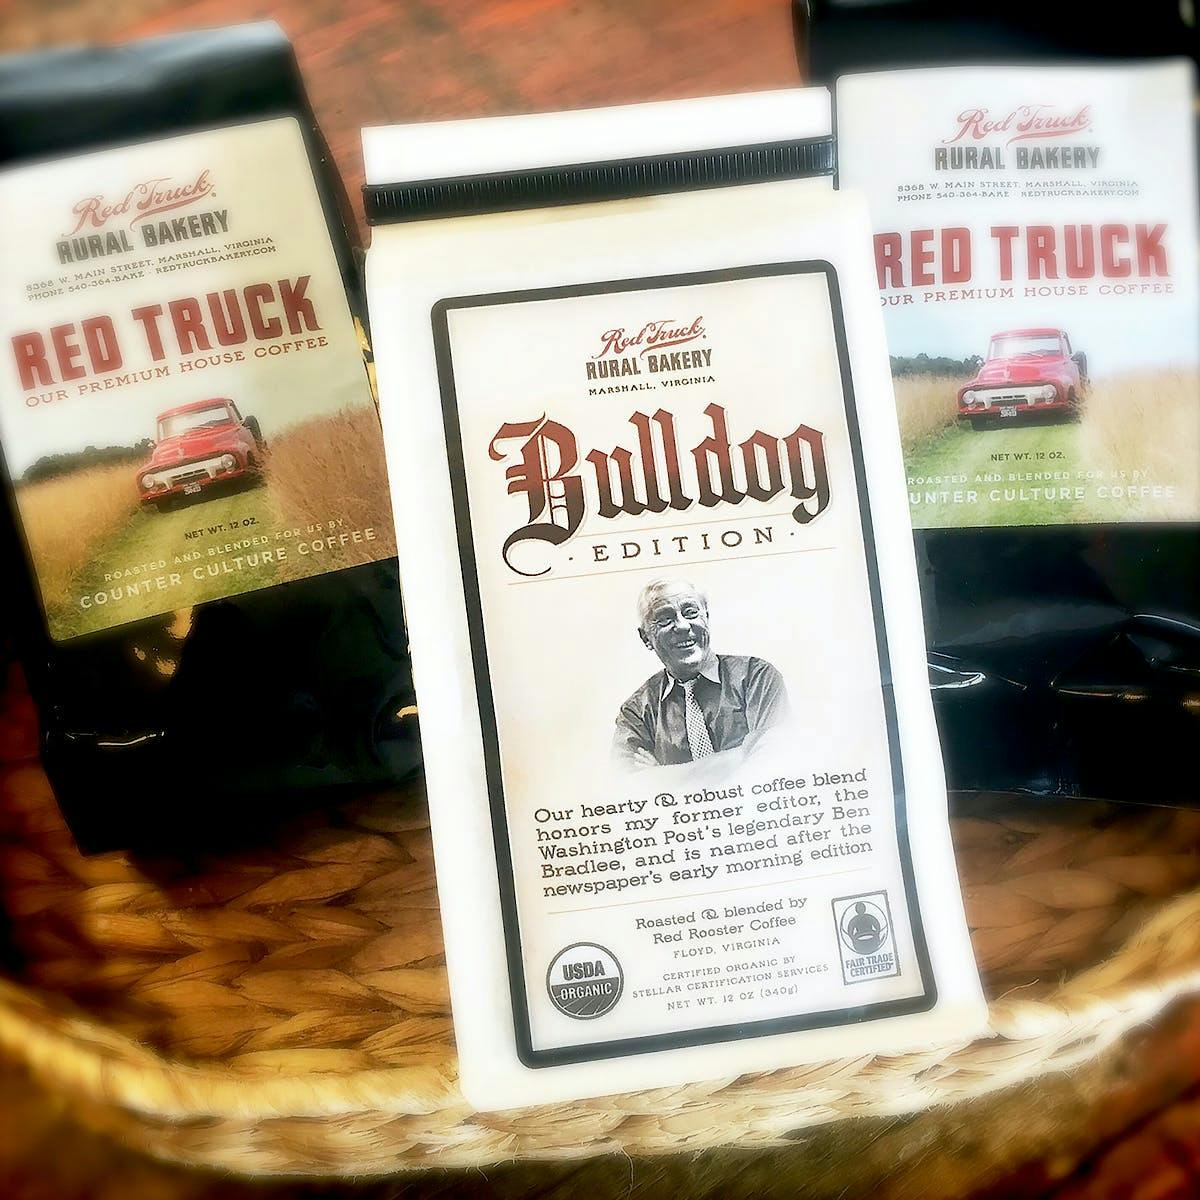 sammenbrud regiment inch Red Truck Bakery Coffee by Red Truck Bakery - Goldbelly